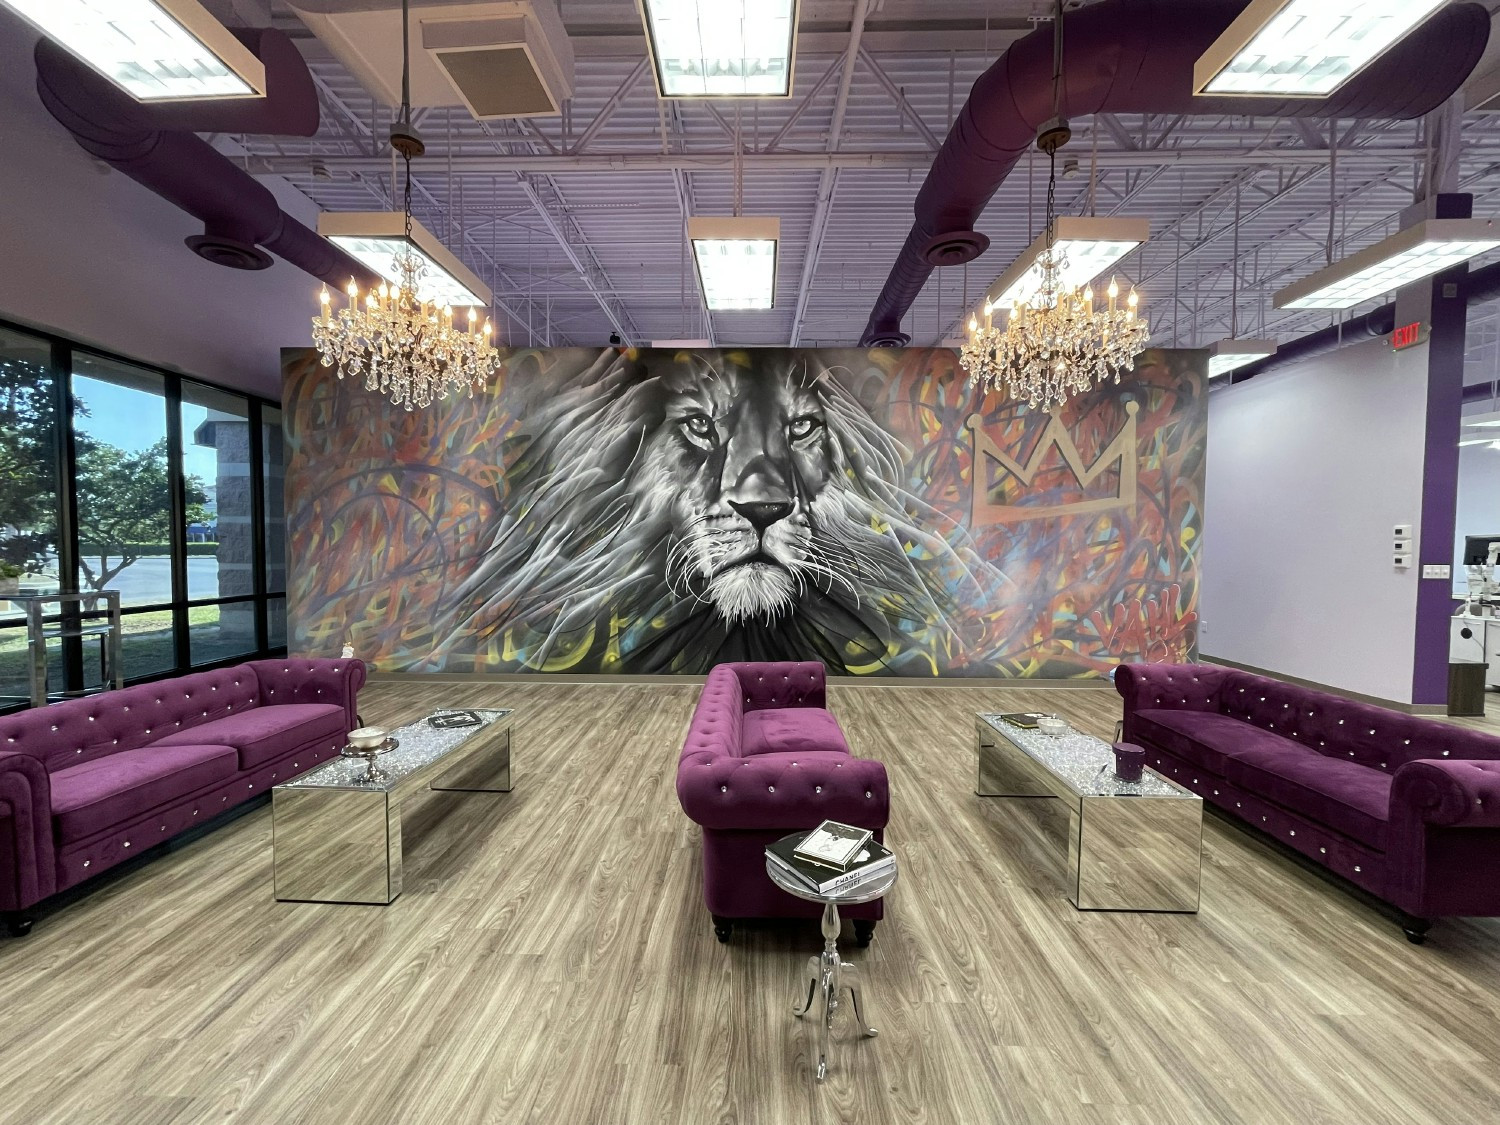 Our office is laidback and fun. We've got graffiti murals, Instagram walls, and plenty of trendy purple decor. 